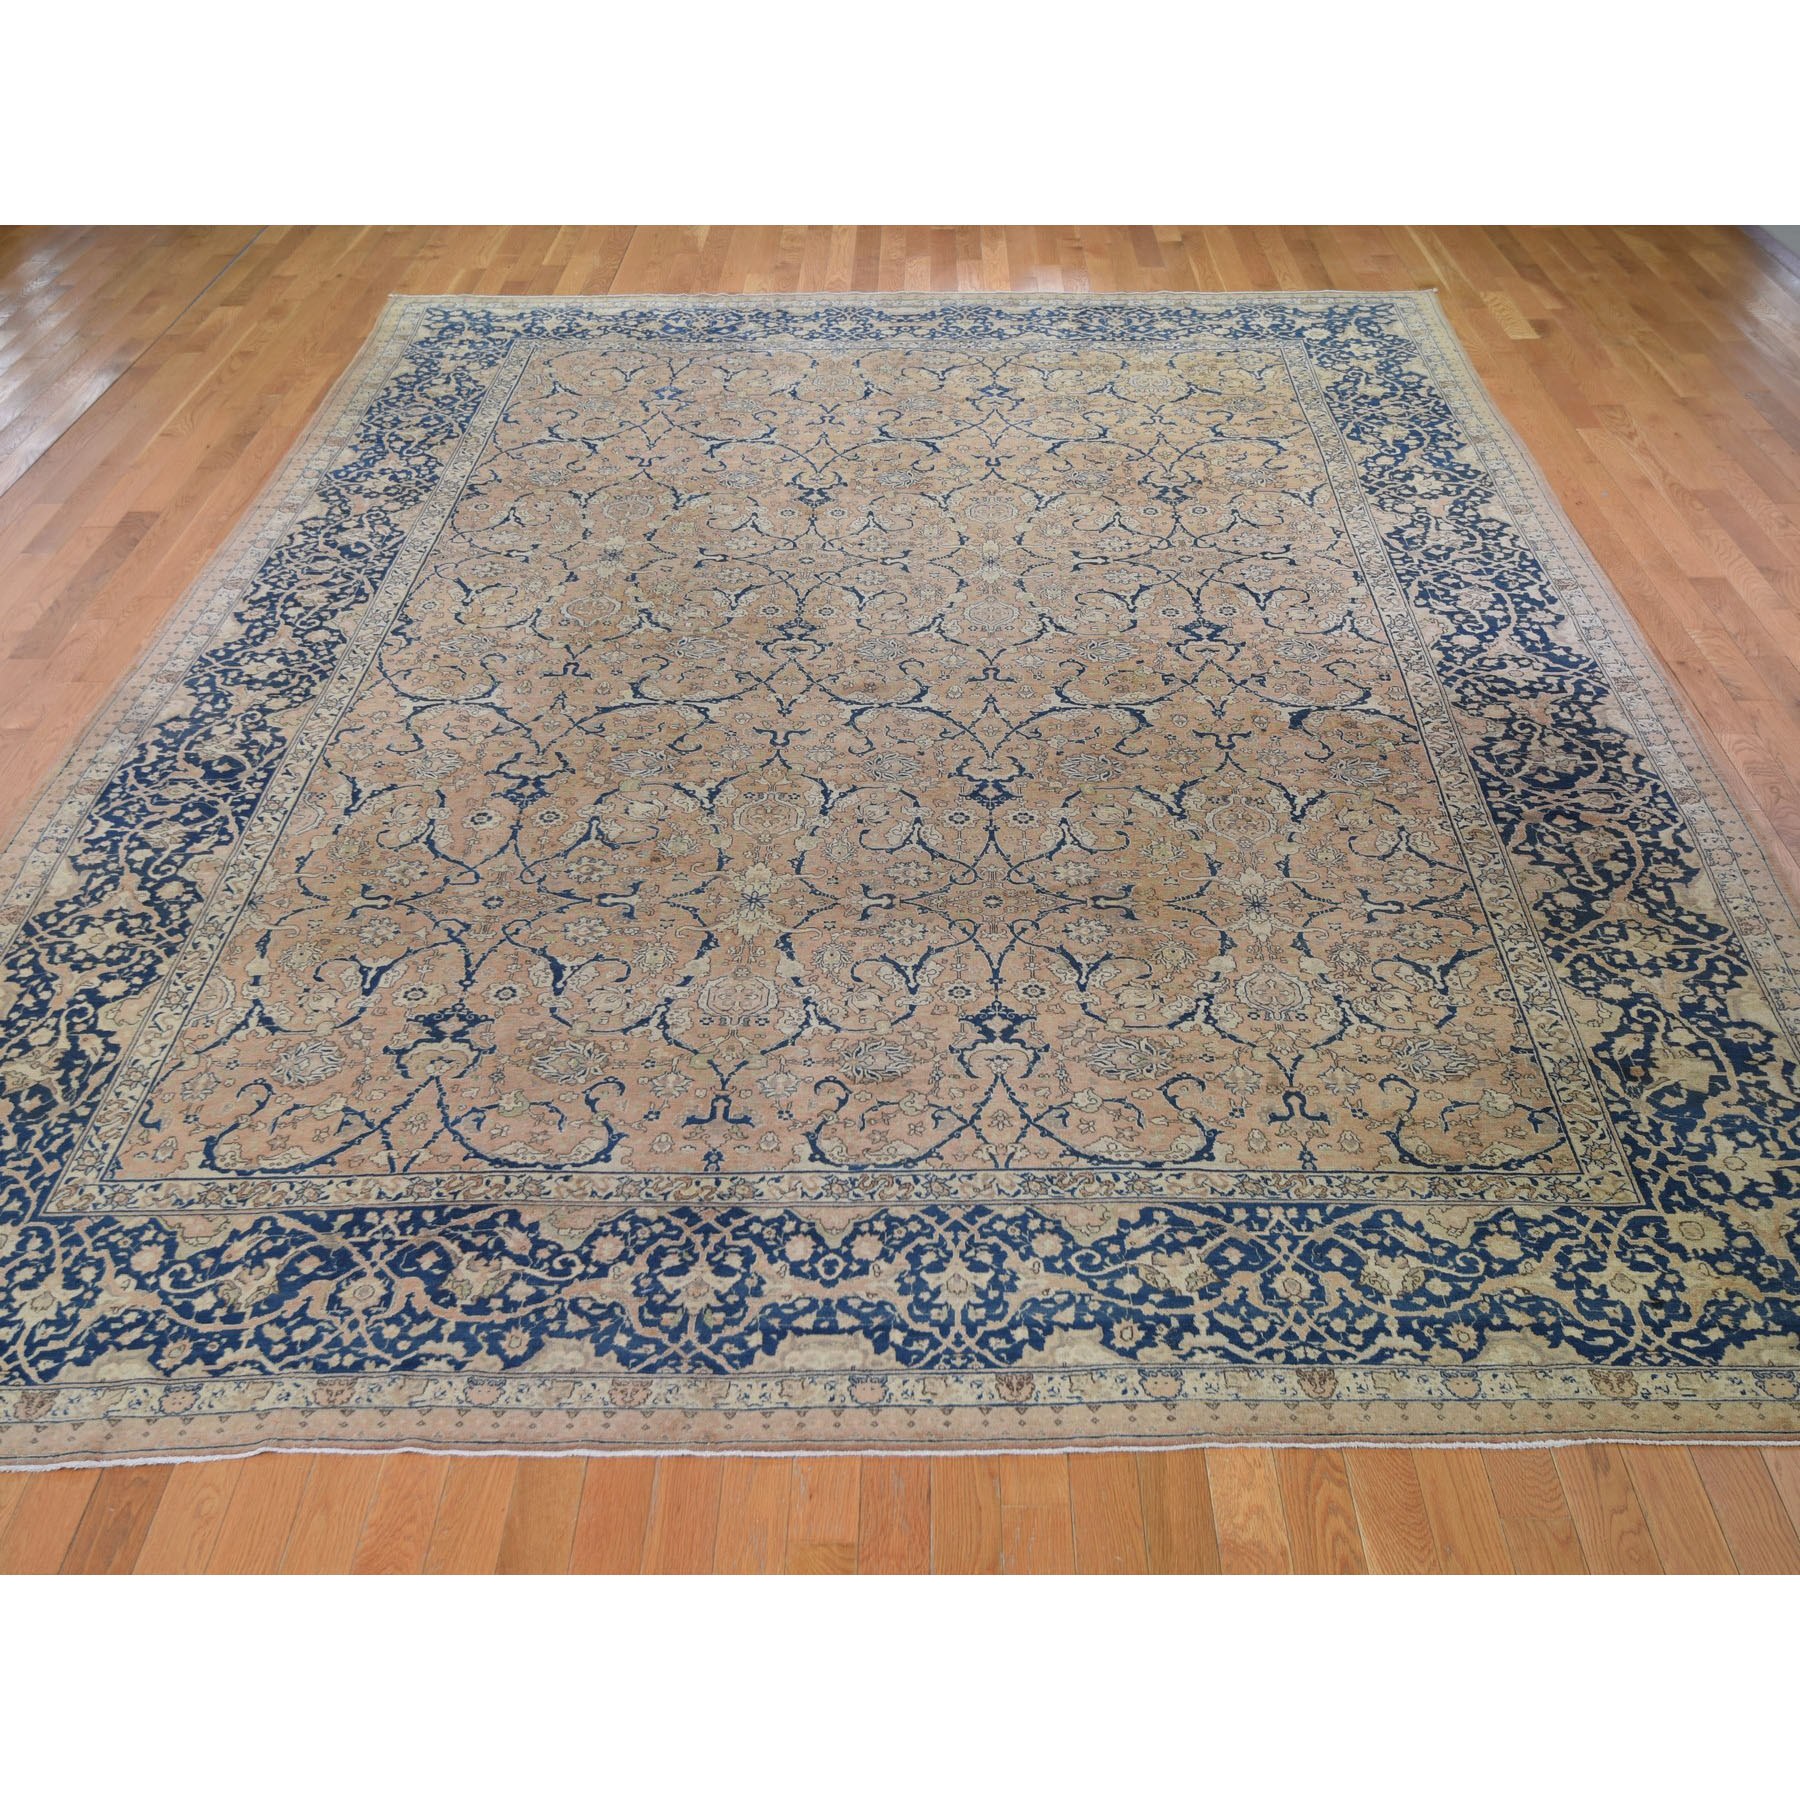 10-4 x14- Antique Persian Tabriz All Over Arabesque Motifs Hand Knotted Oriental Rug 